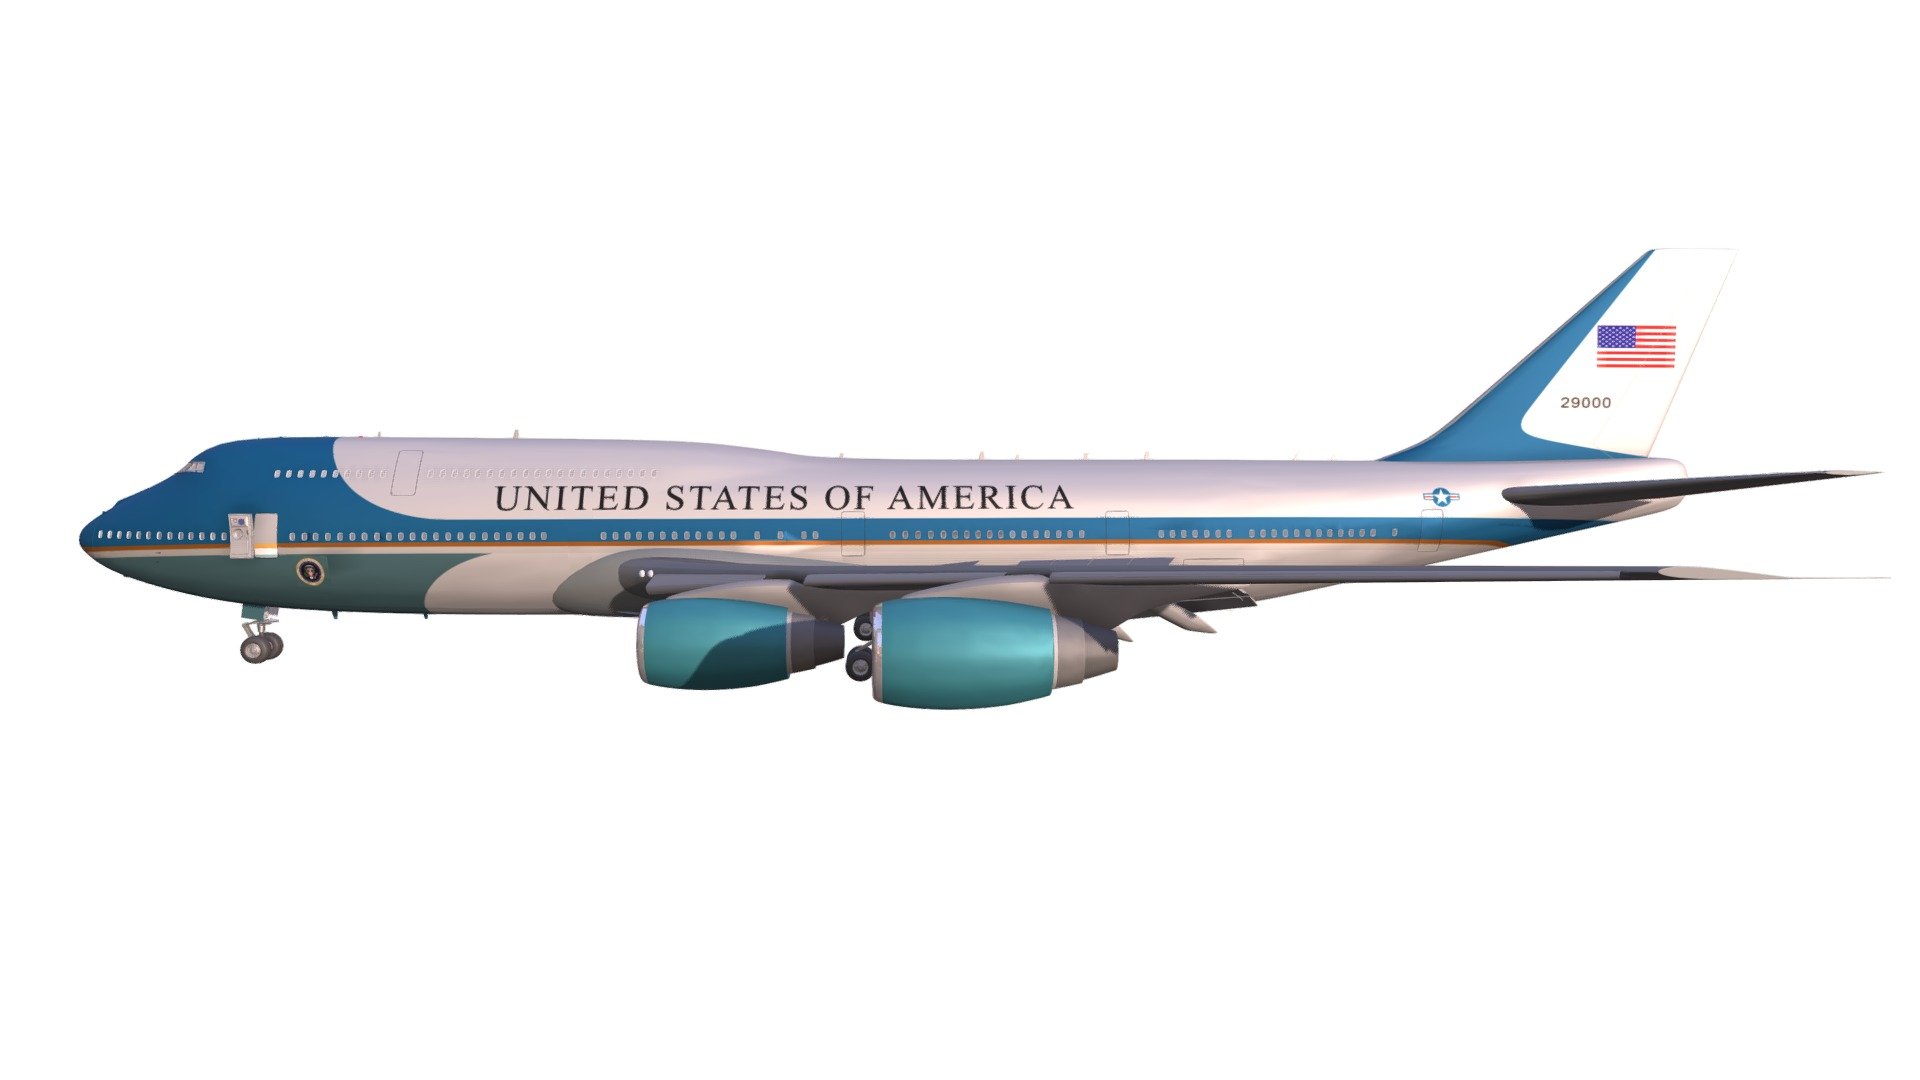 High detailed and correctly scaled 3d model of Boeing Air Force One VC-25, aircraft carrying the President of the United States.

This version is Landing scene 3d model